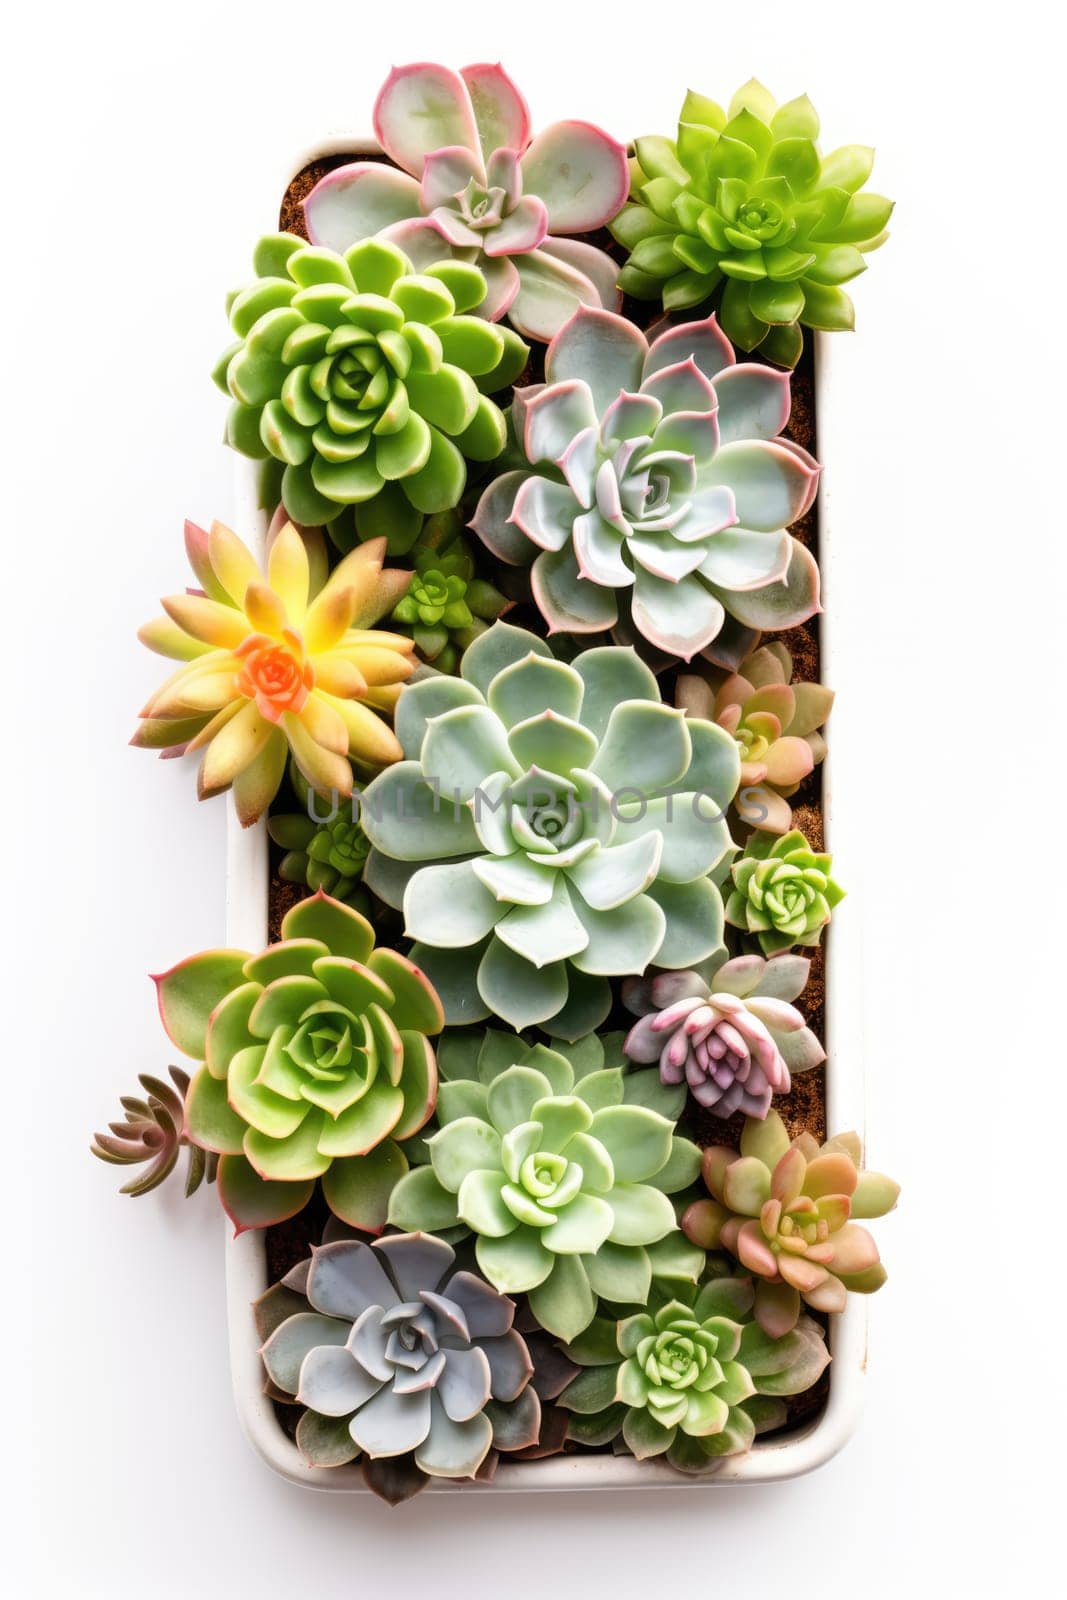 pattern of mixed succulents plant in pot pattern on white background , overhead or top view.